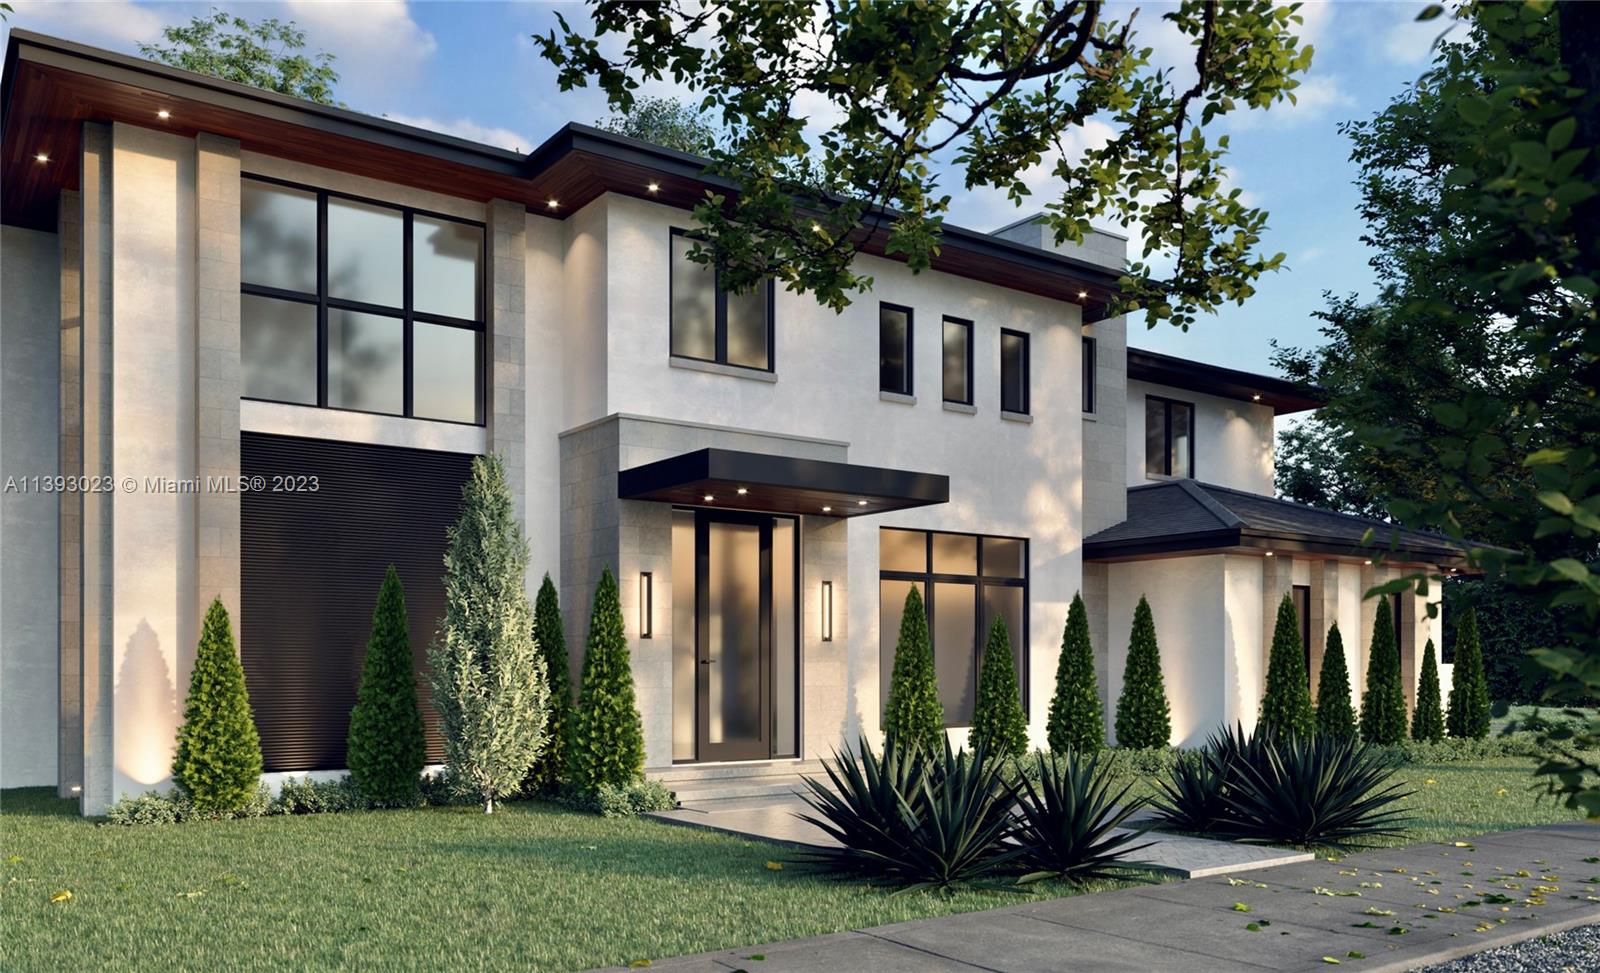 Rare pre-construction opportunity to buy a spectacular new home in the highly sought after Coral Gables neighborhood known as the Platinum Triangle. Expected completion August 2024. To be built on a 10,043 SF lot near the Cocoplum Circle, which connects the scenic & tree-canopied roadways of Ingraham Highway, Sunset Drive & Old Cutler Road. Pacheco Architecture has designed this 5618 SF home that features: 6BR’s/6.5BA’s, Subzero & Wolf appliances, porcelain tile flooring, elevator, 2 car garage & pool. Close to all of the best that Miami has to offer: world-class dining & shopping in Coral Gables, Coconut Grove & South Miami and to highly acclaimed schools.